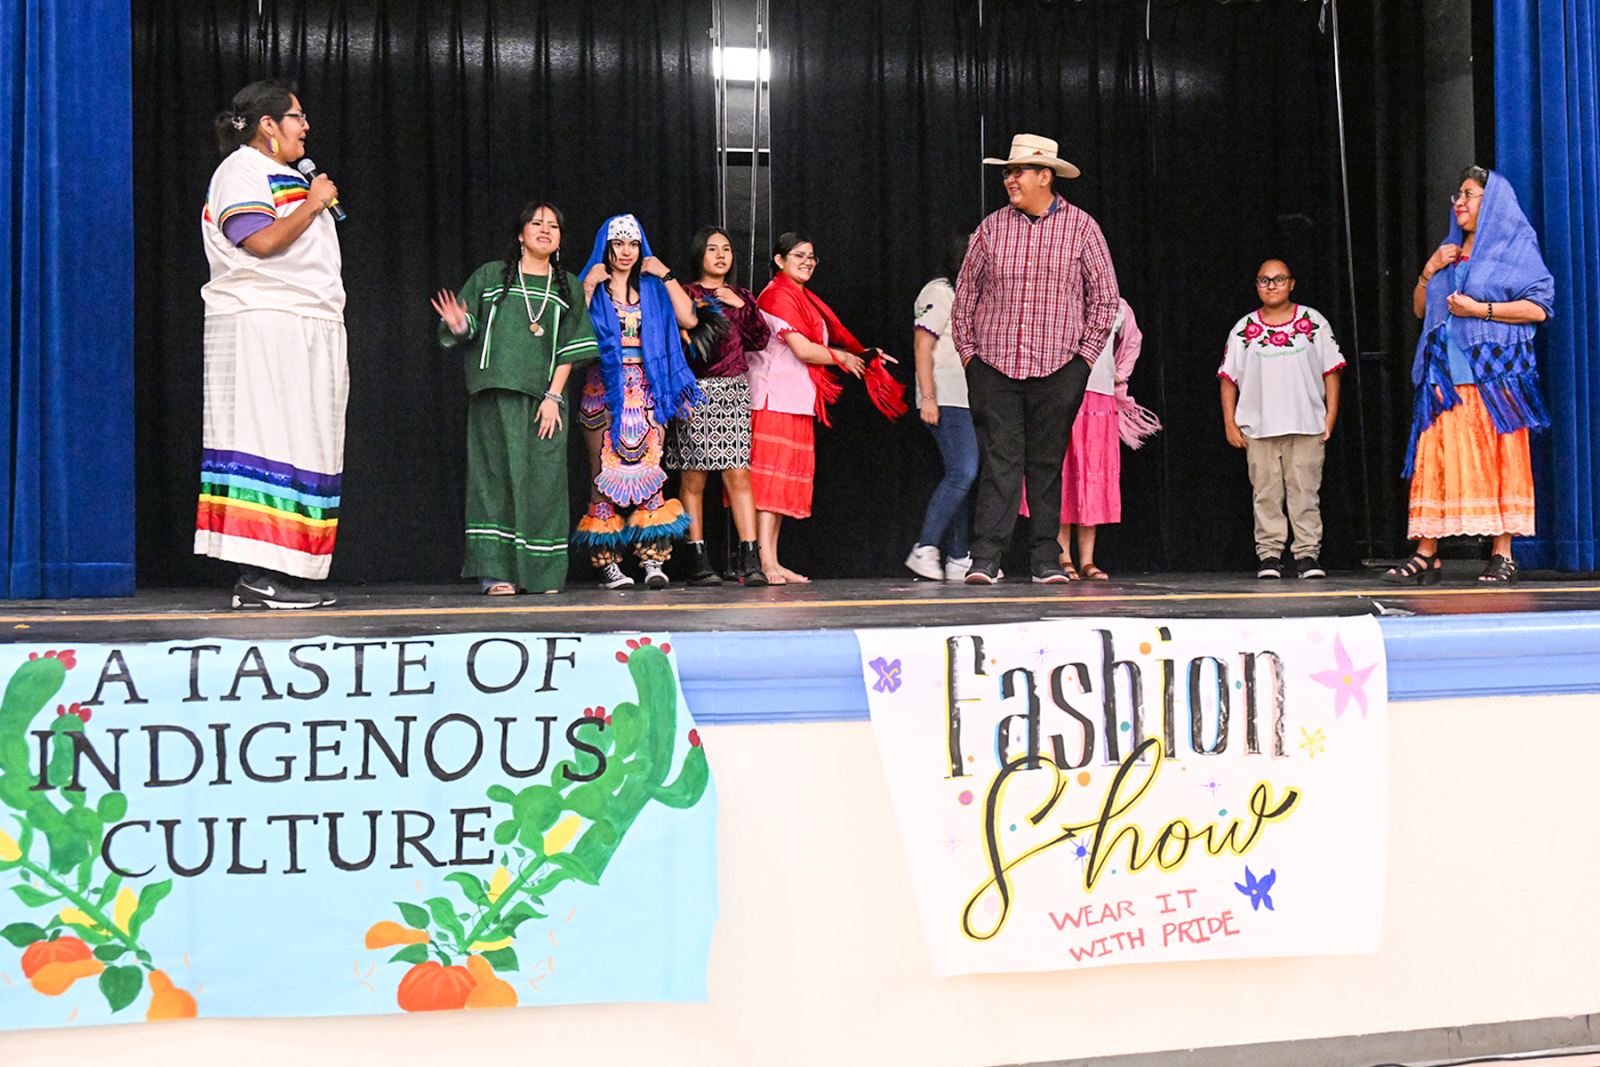 Students and staff show off their Indigenous clothing during the event's fashion show.